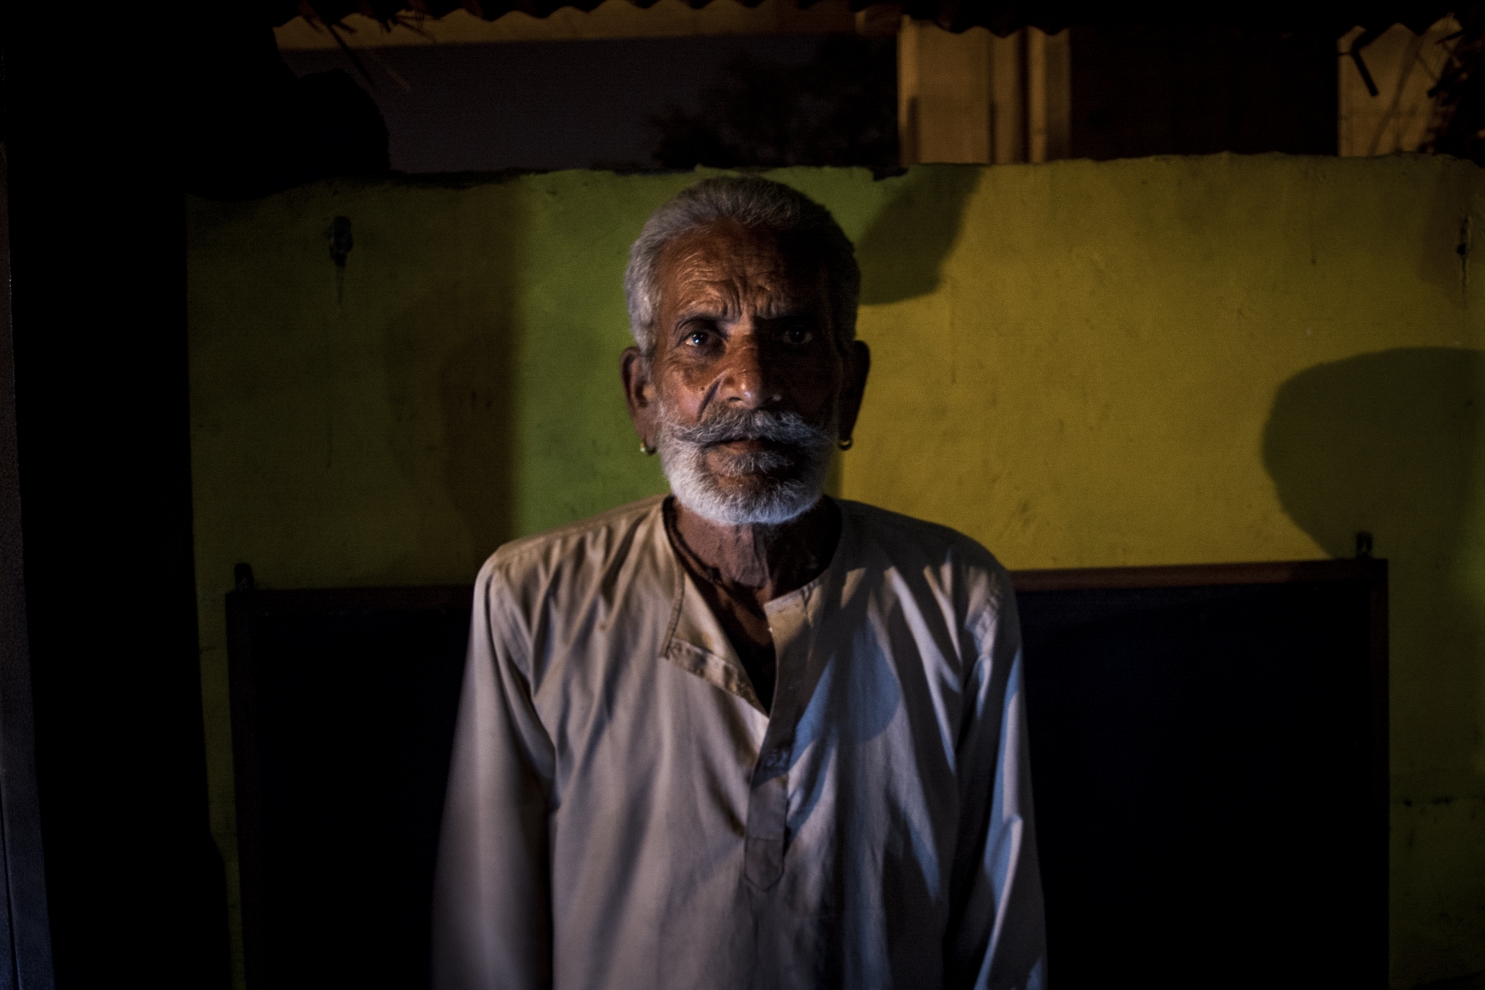 Mukundilal Chauhan (62), is one of the eldest members of the settlement. He is the one who is leading the fight for his community’s rights on various platforms.